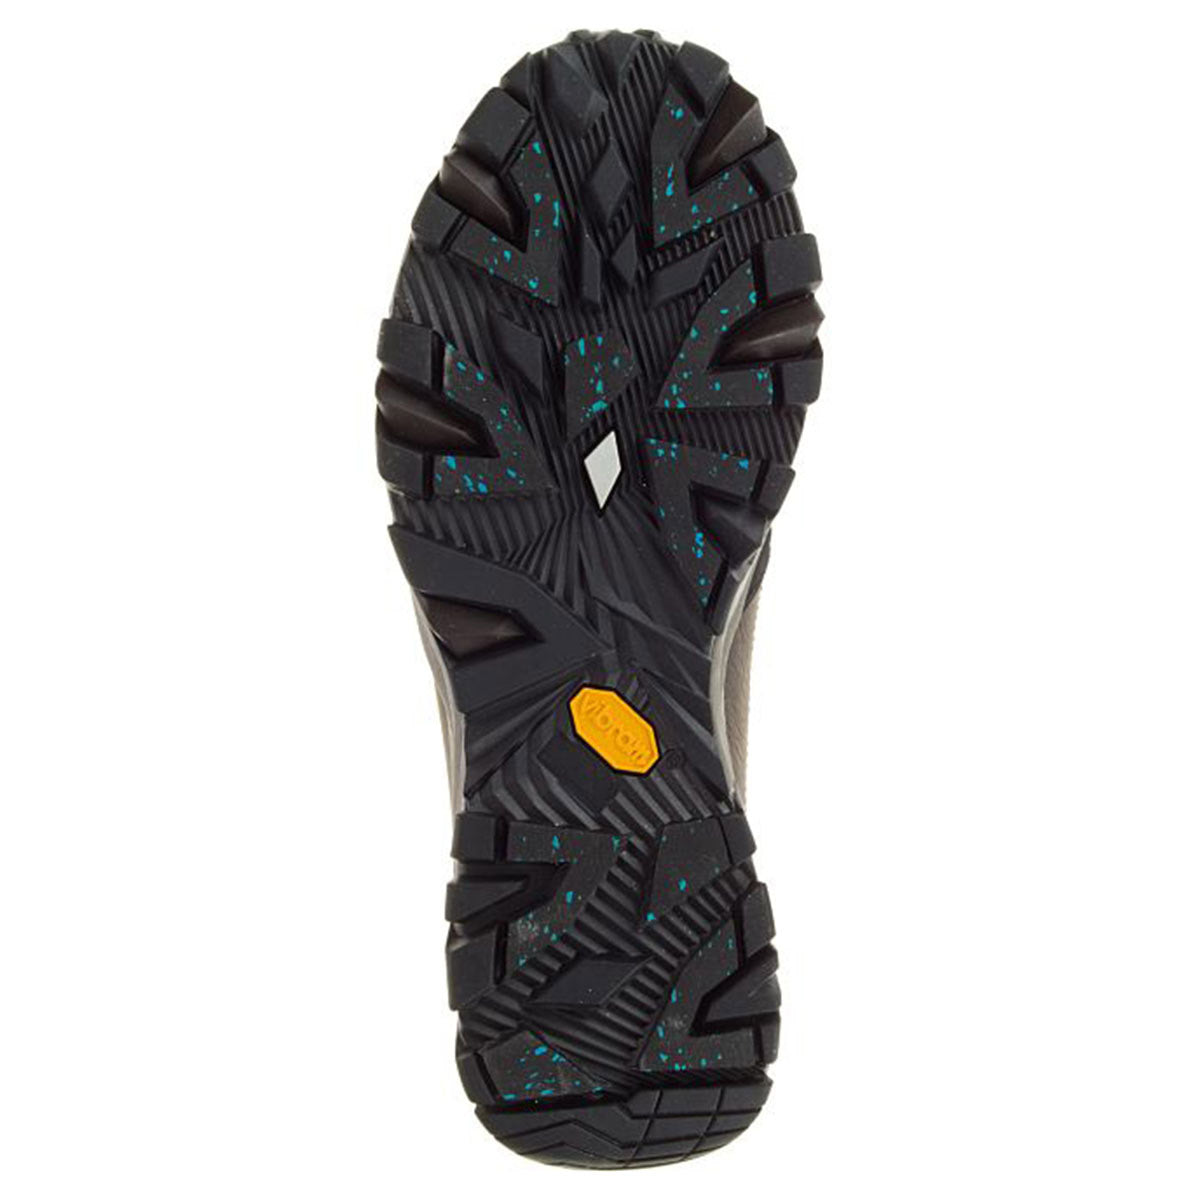 Tread pattern of a Merrell COLDPACK ICE + MOC WP waterproof slip-on sport shoe sole with black and blue accents.